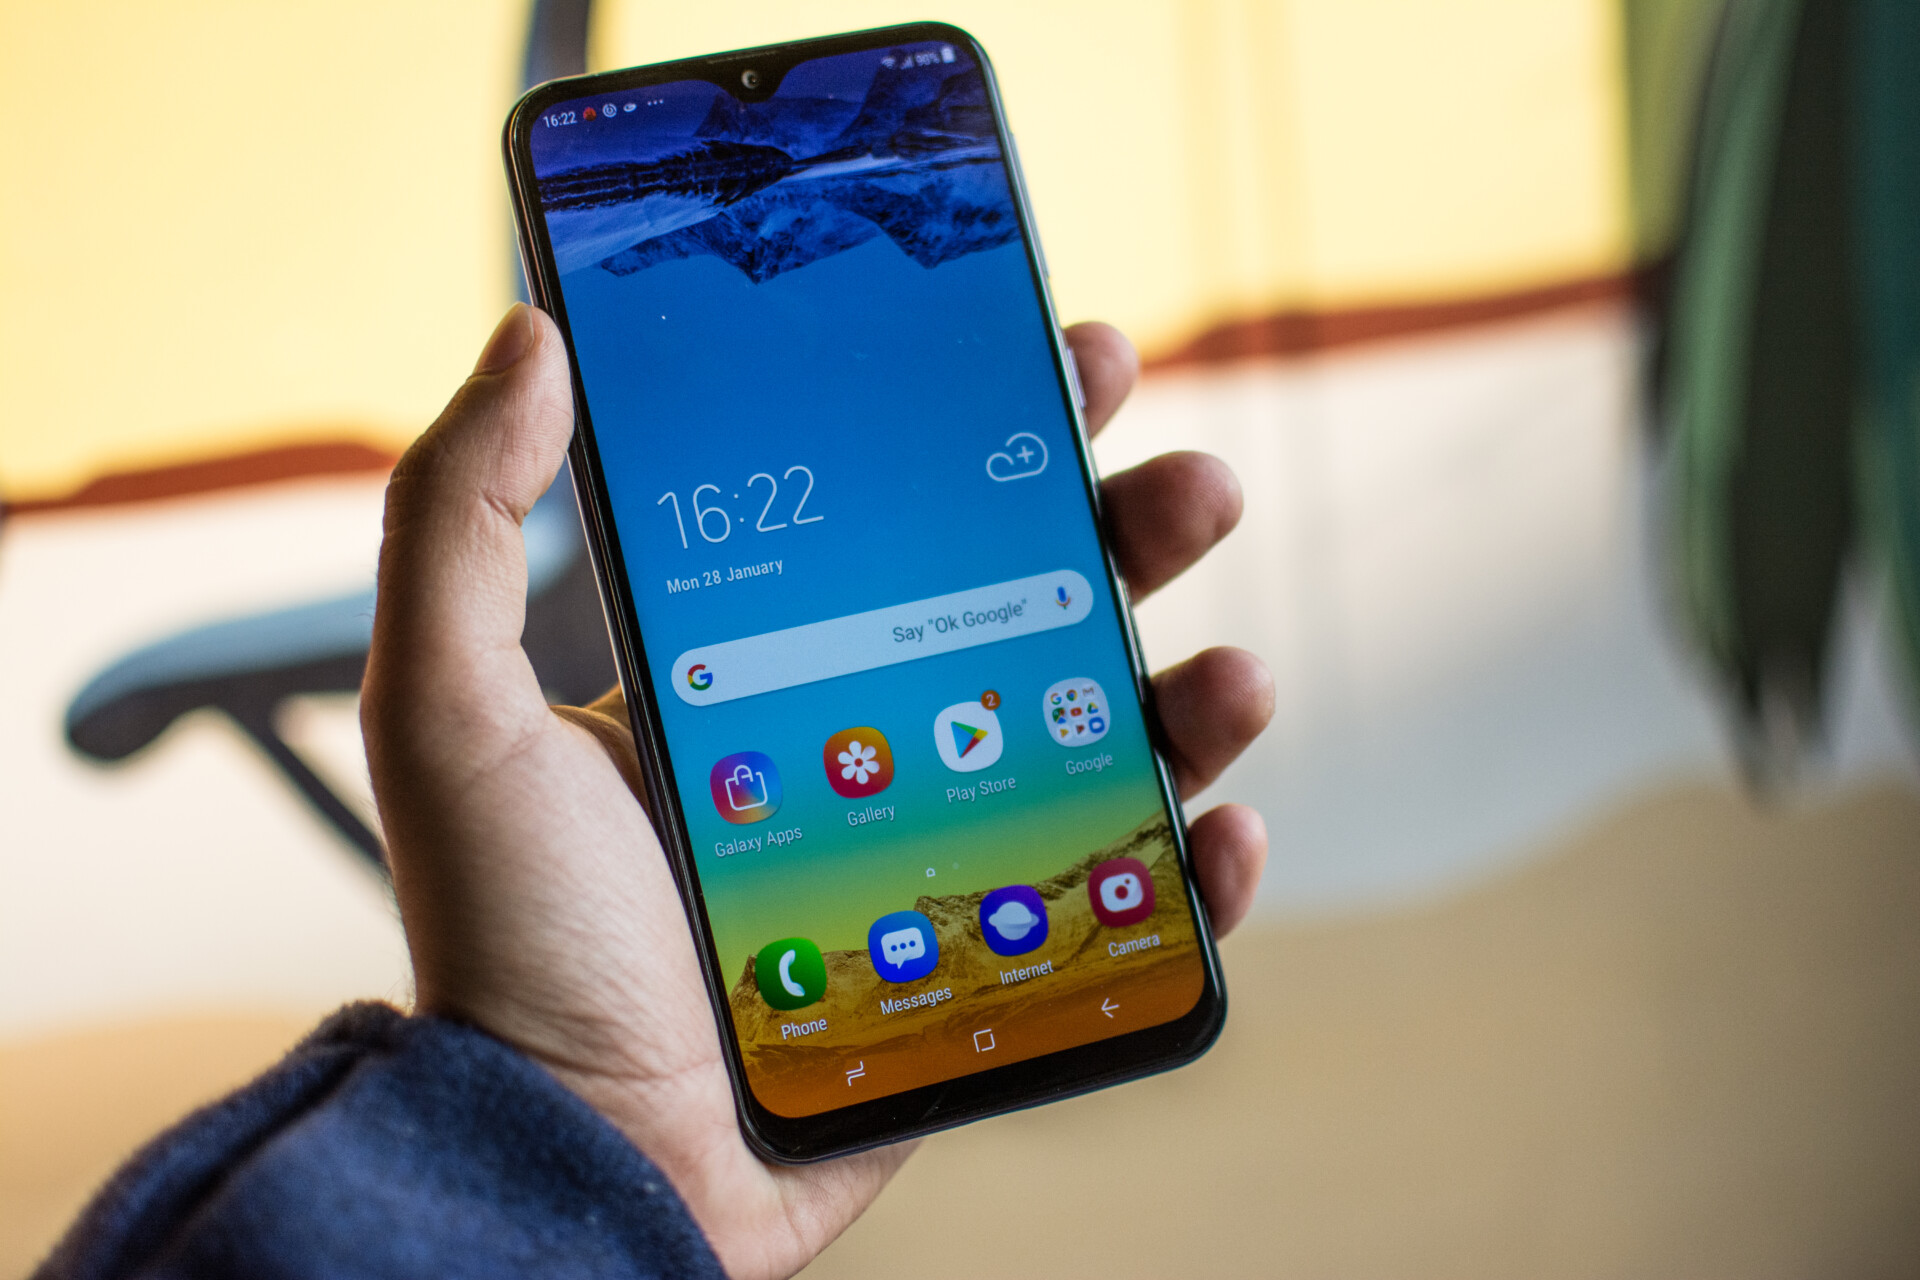 Samsung Galaxy M20 with 6.3-inch display with a 19.5:9 aspect ratio held in hand.